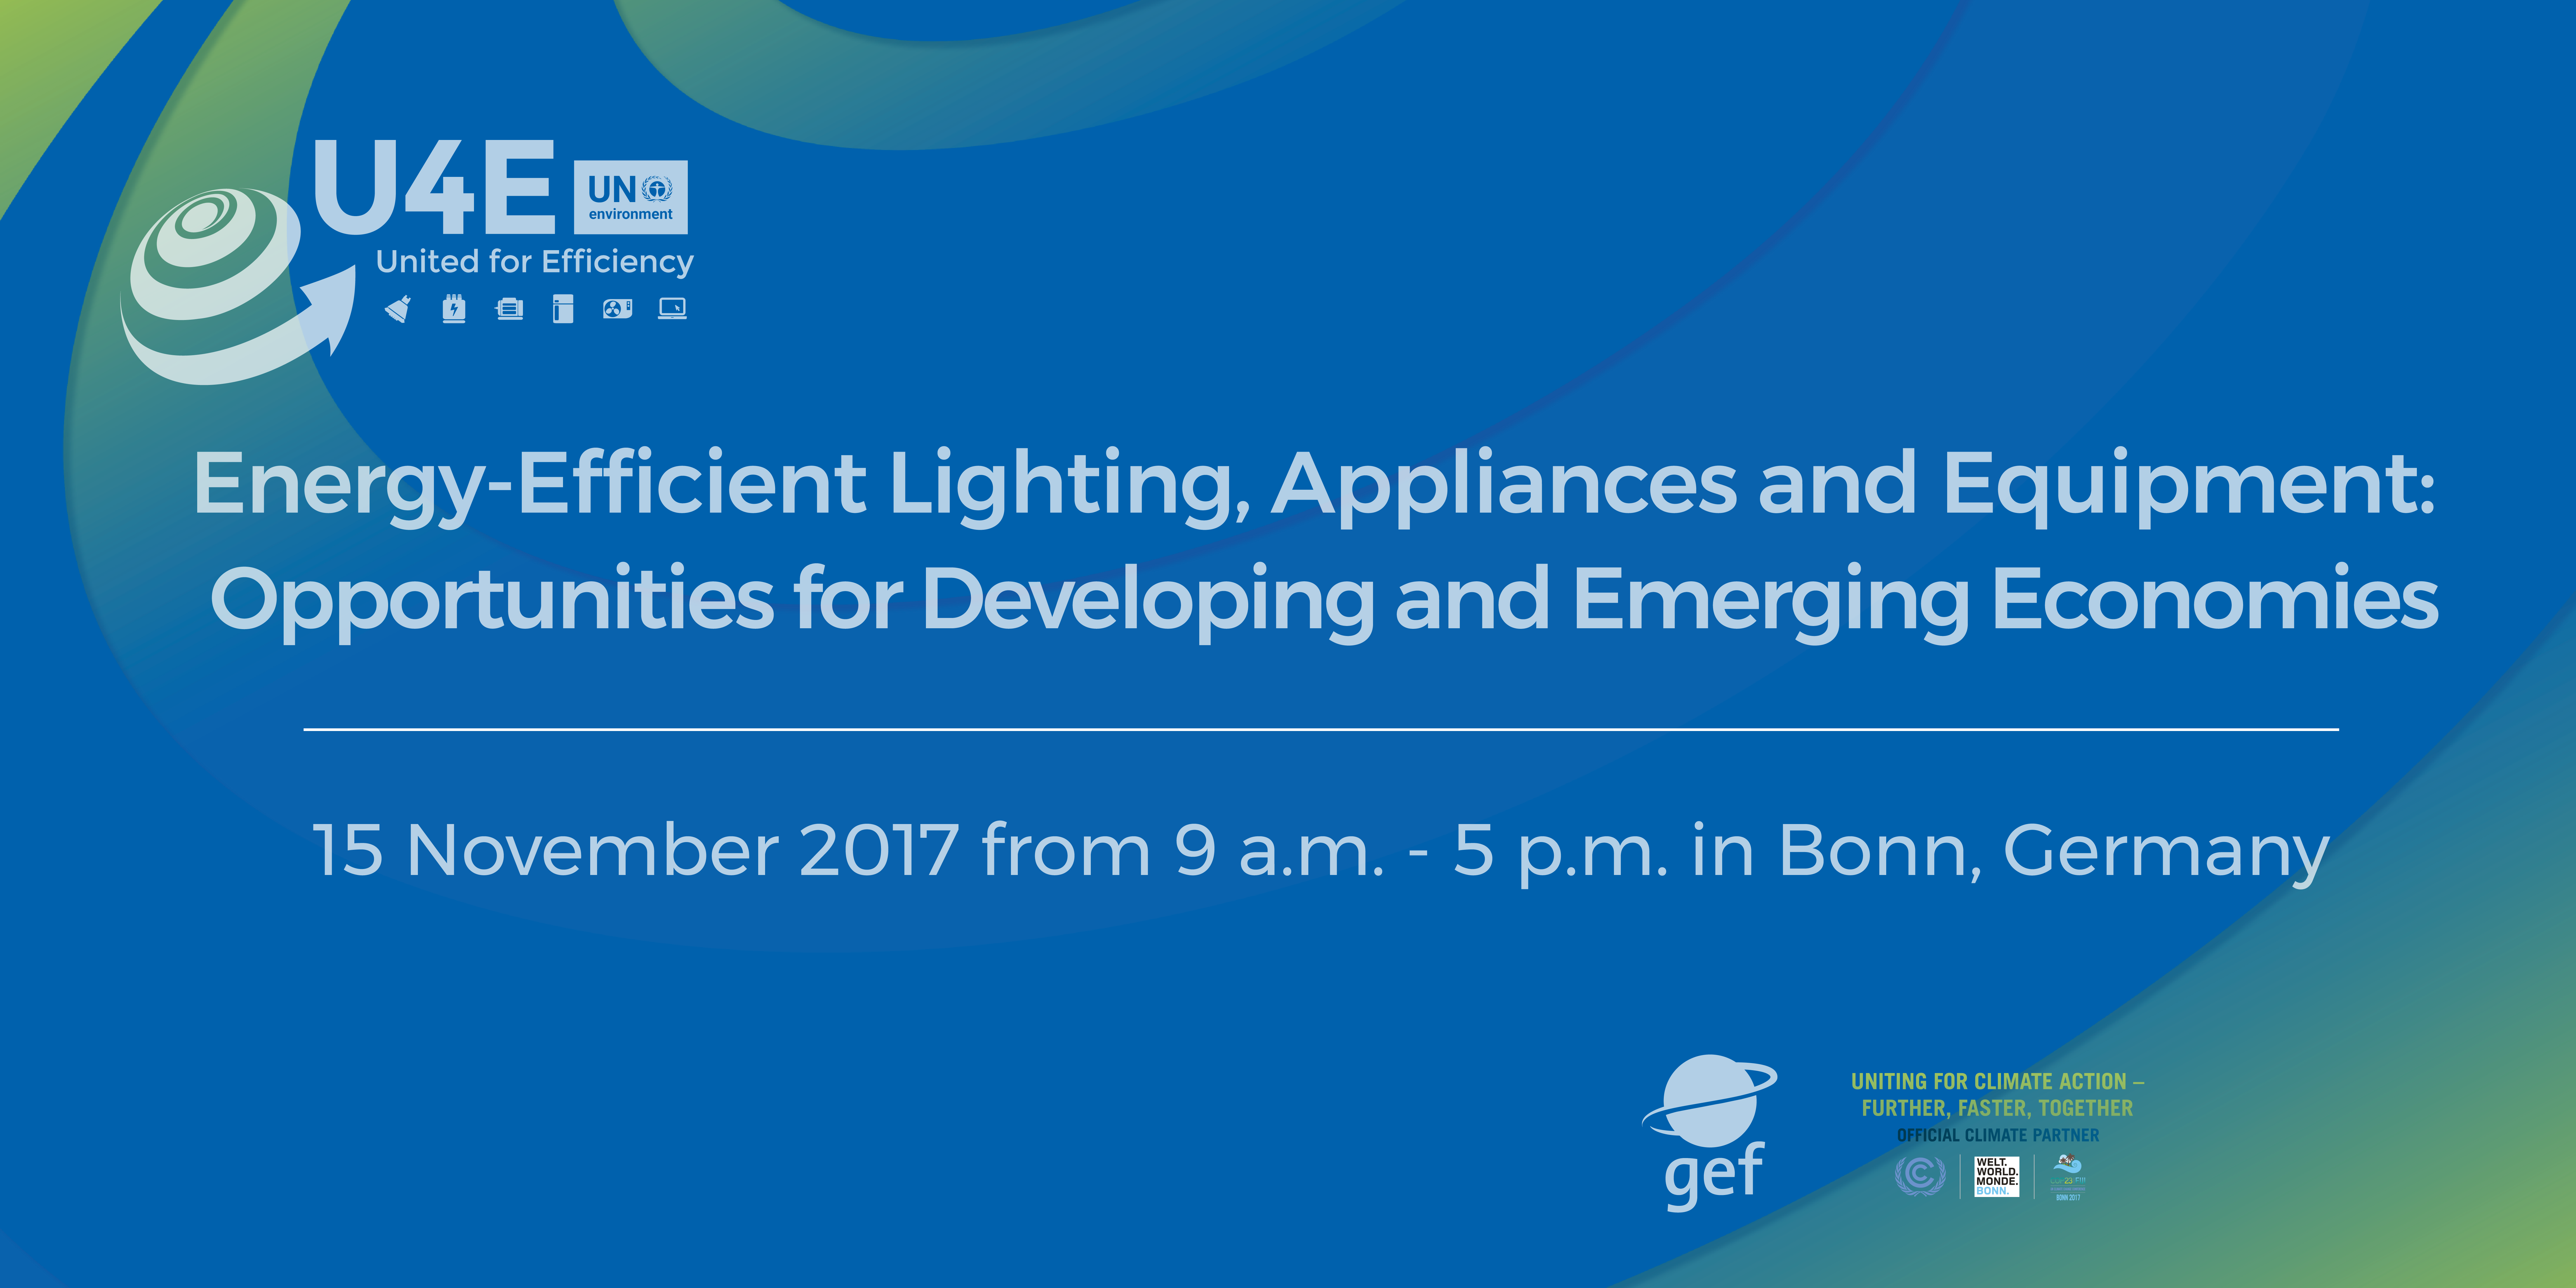 Energy-Efficient Lighting, Appliances and Equipment: Opportunities for Developing and Emerging Economies